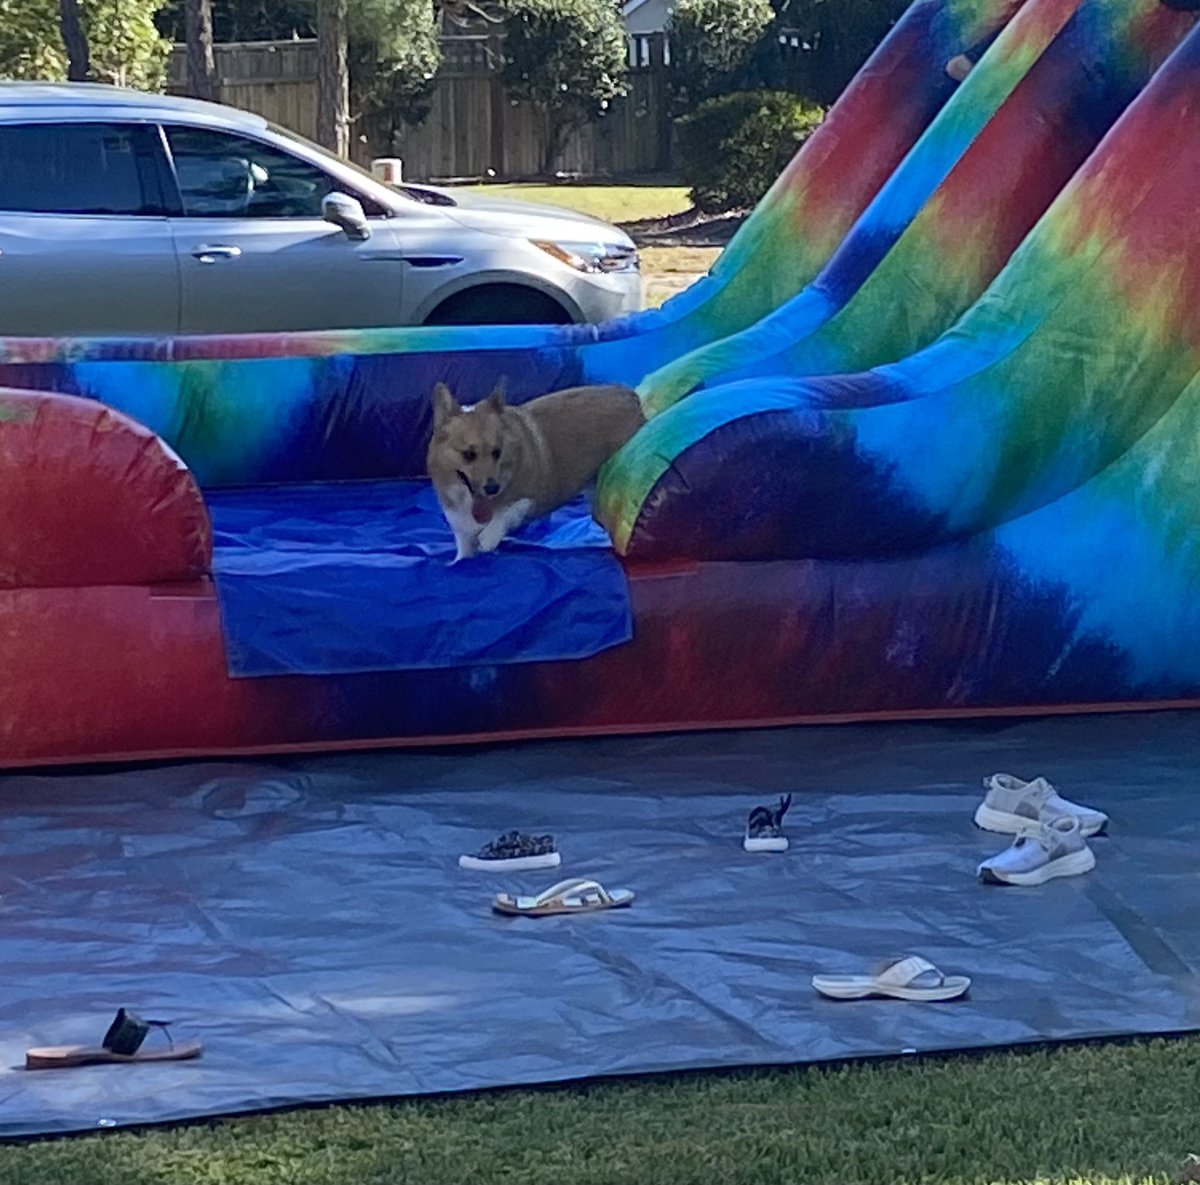 Invited to a birthday party and got to play in the bouncy castle! The coup de grâce was the pizza crust I scored. #CorgiCrew